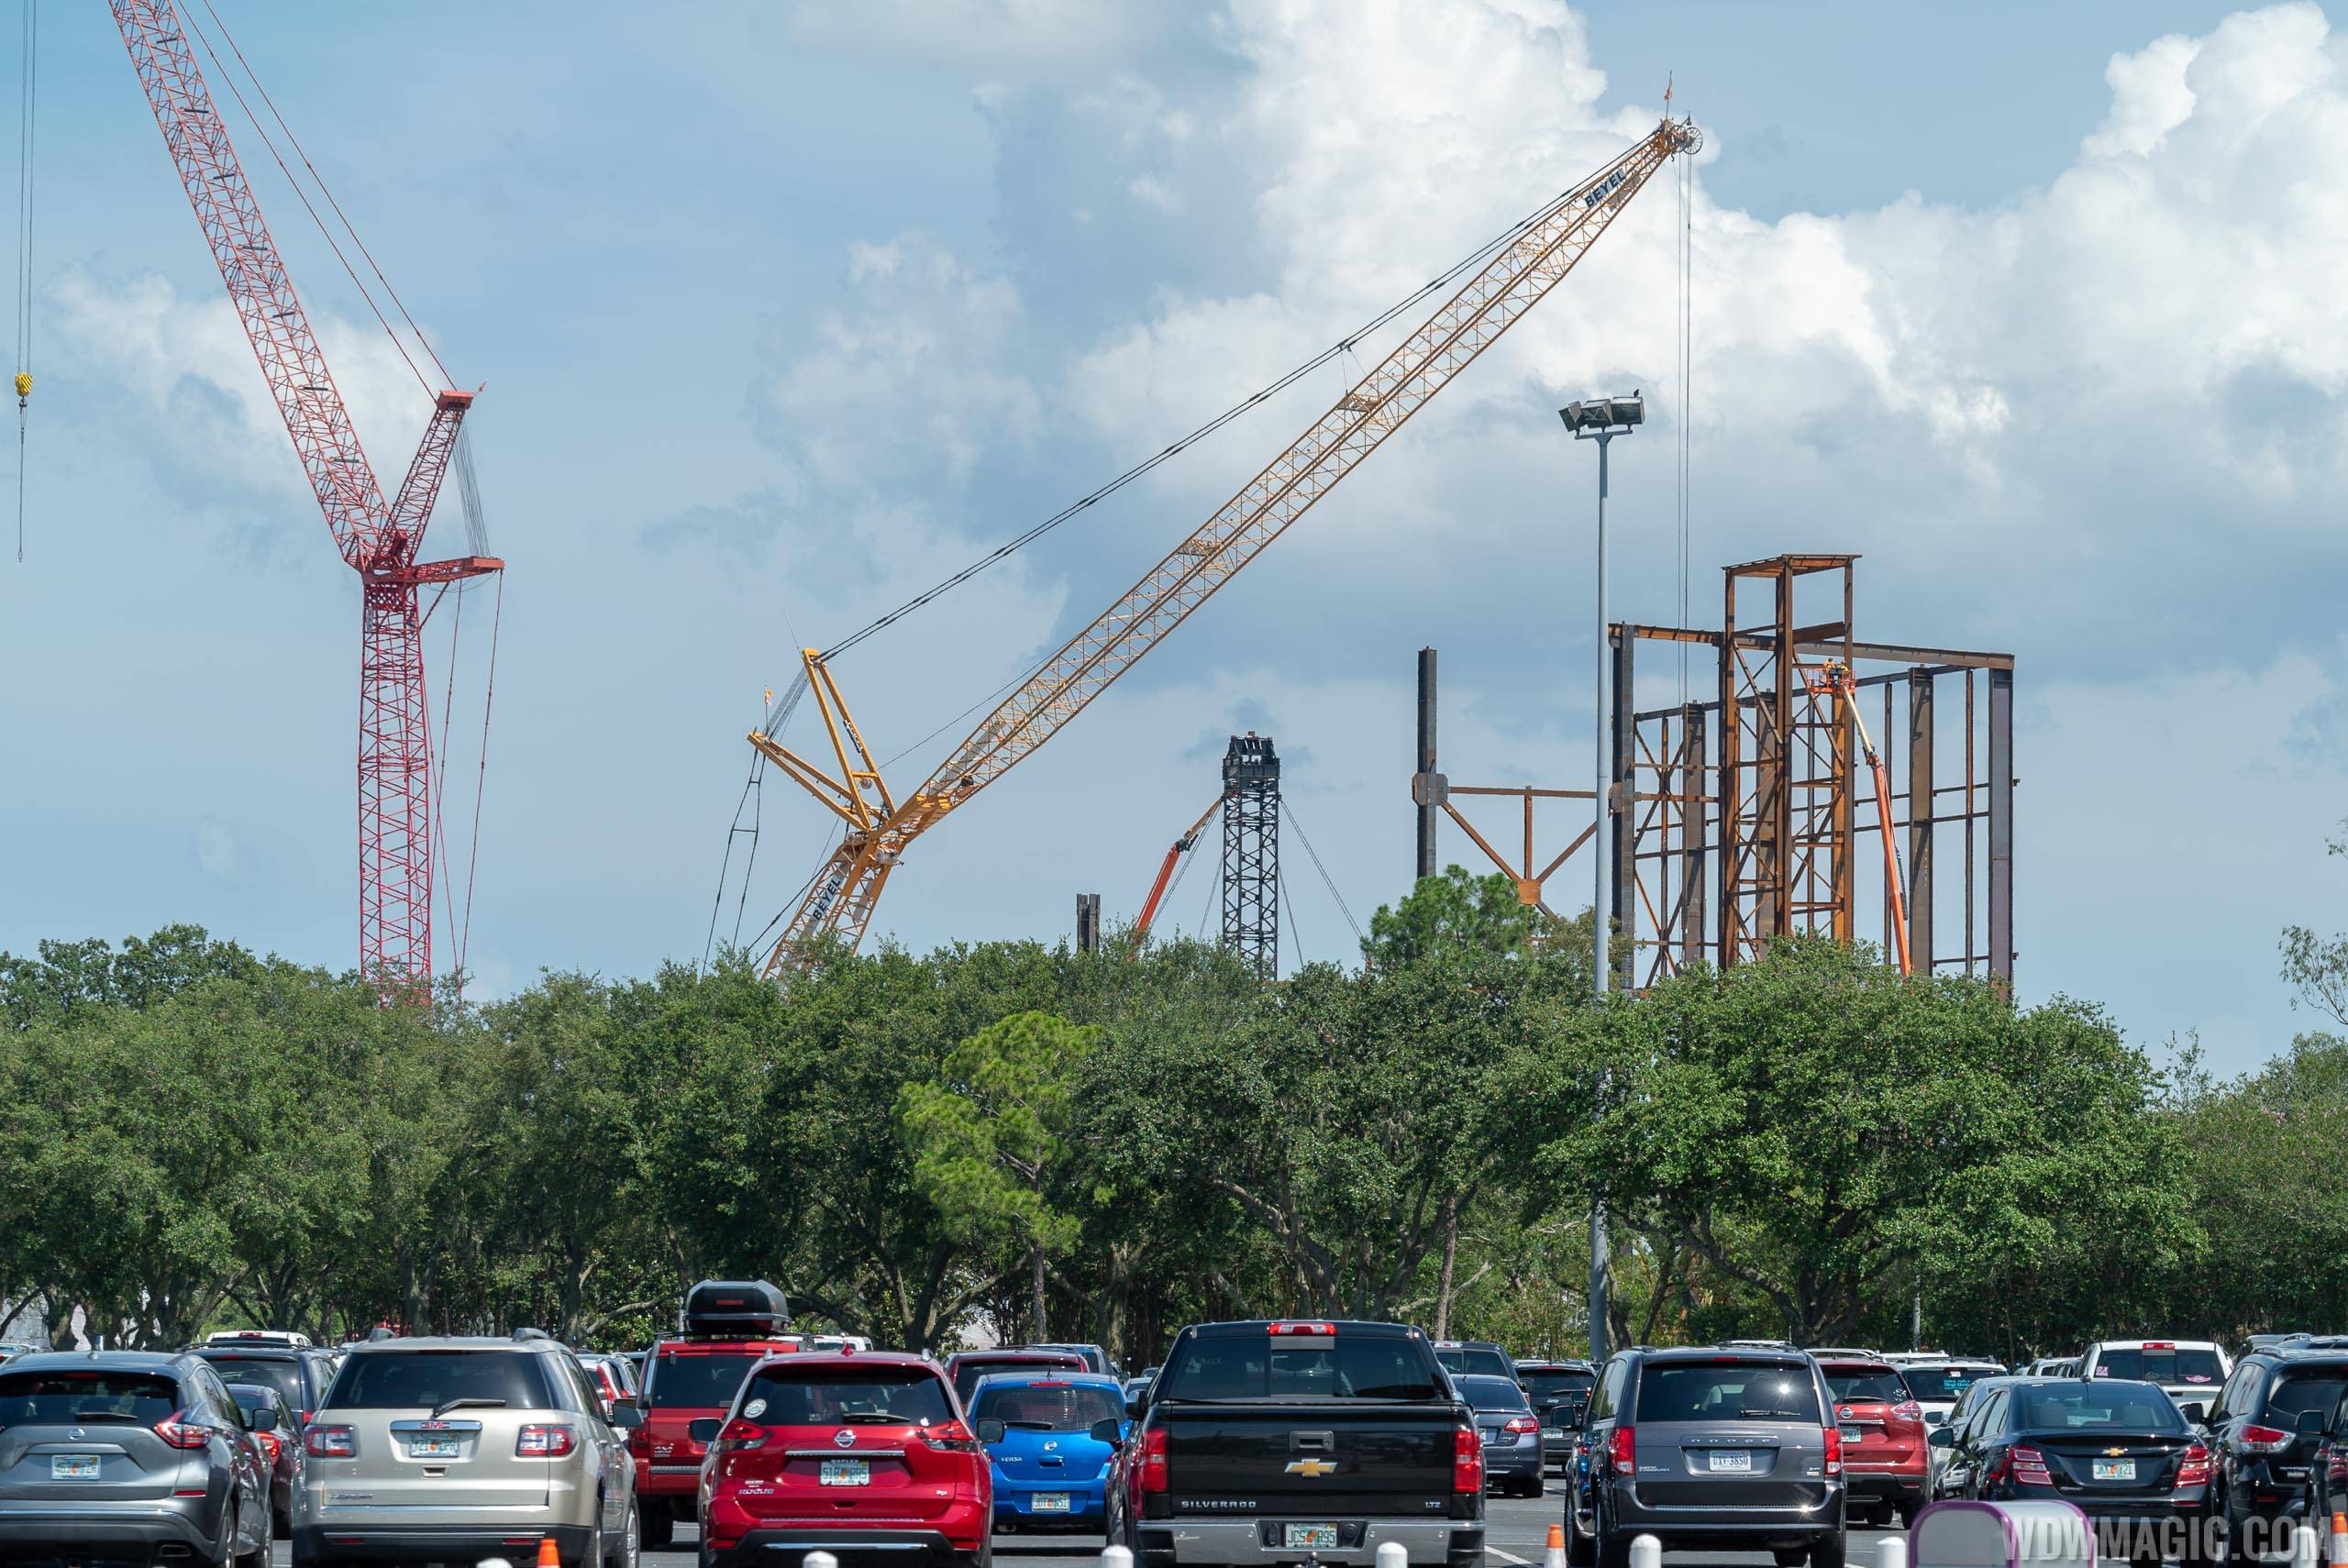 Guardians of the Galaxy coaster construction - June 2018